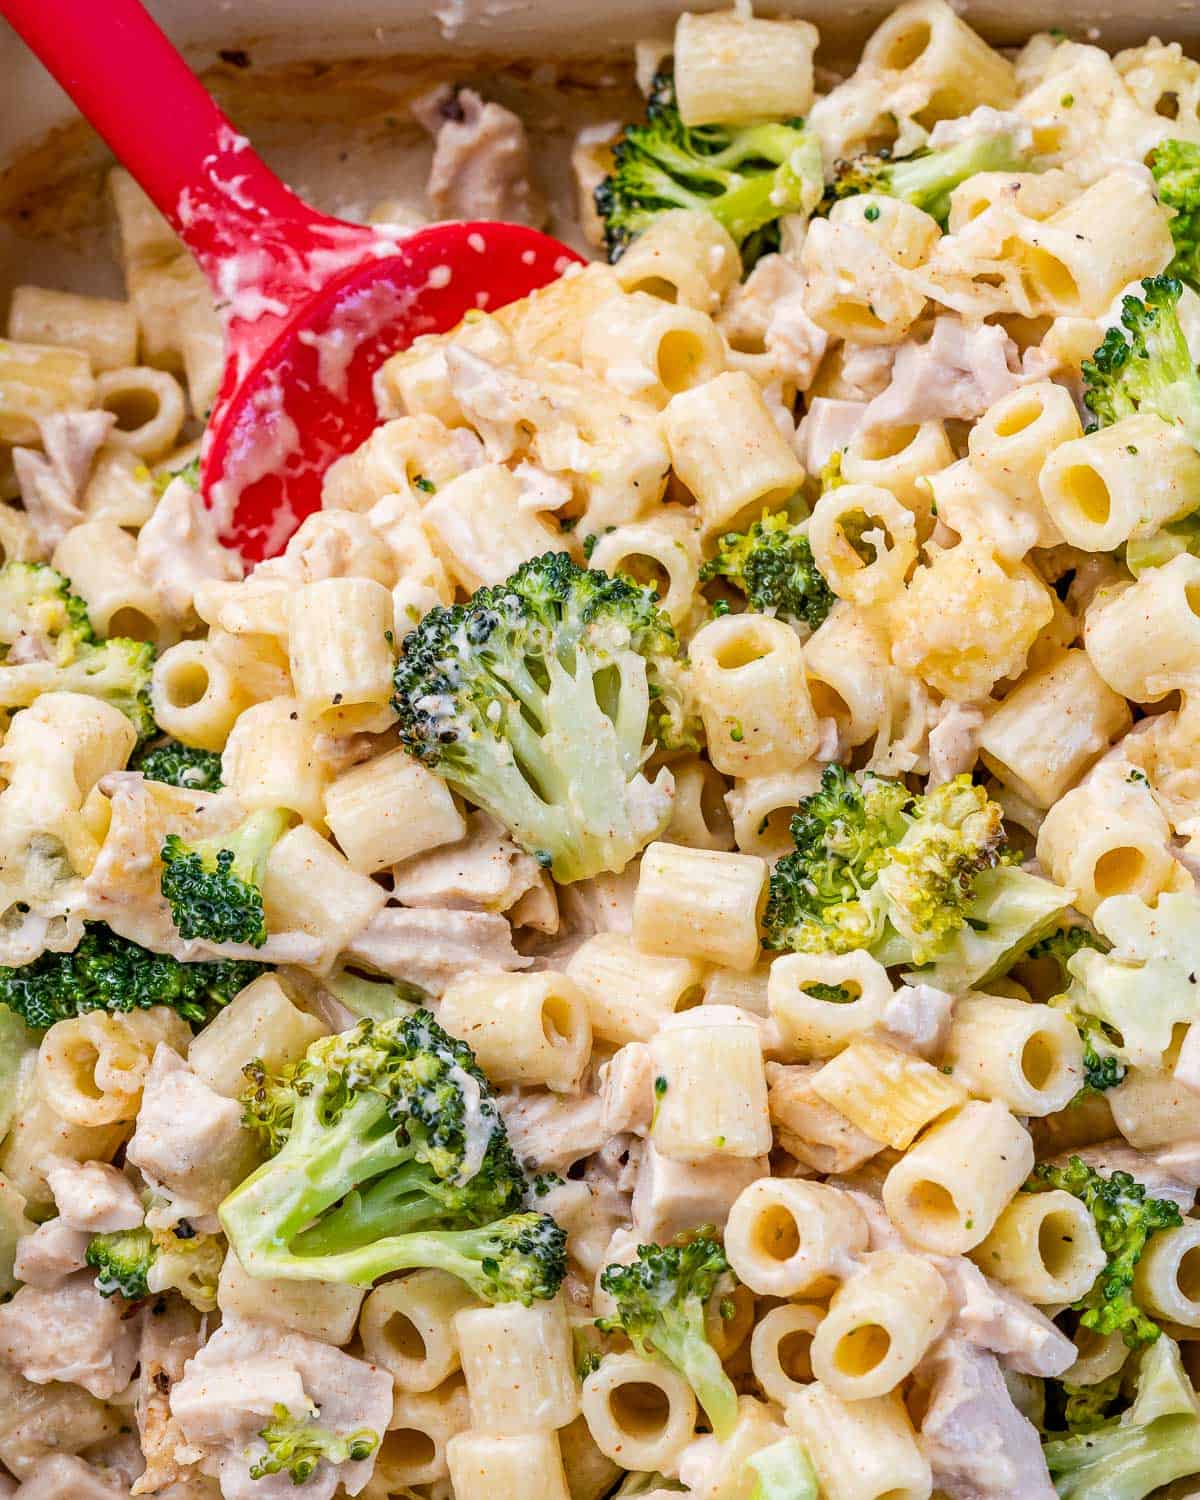 Dishing out a serving of pasta, broccoli and chicken casserole.